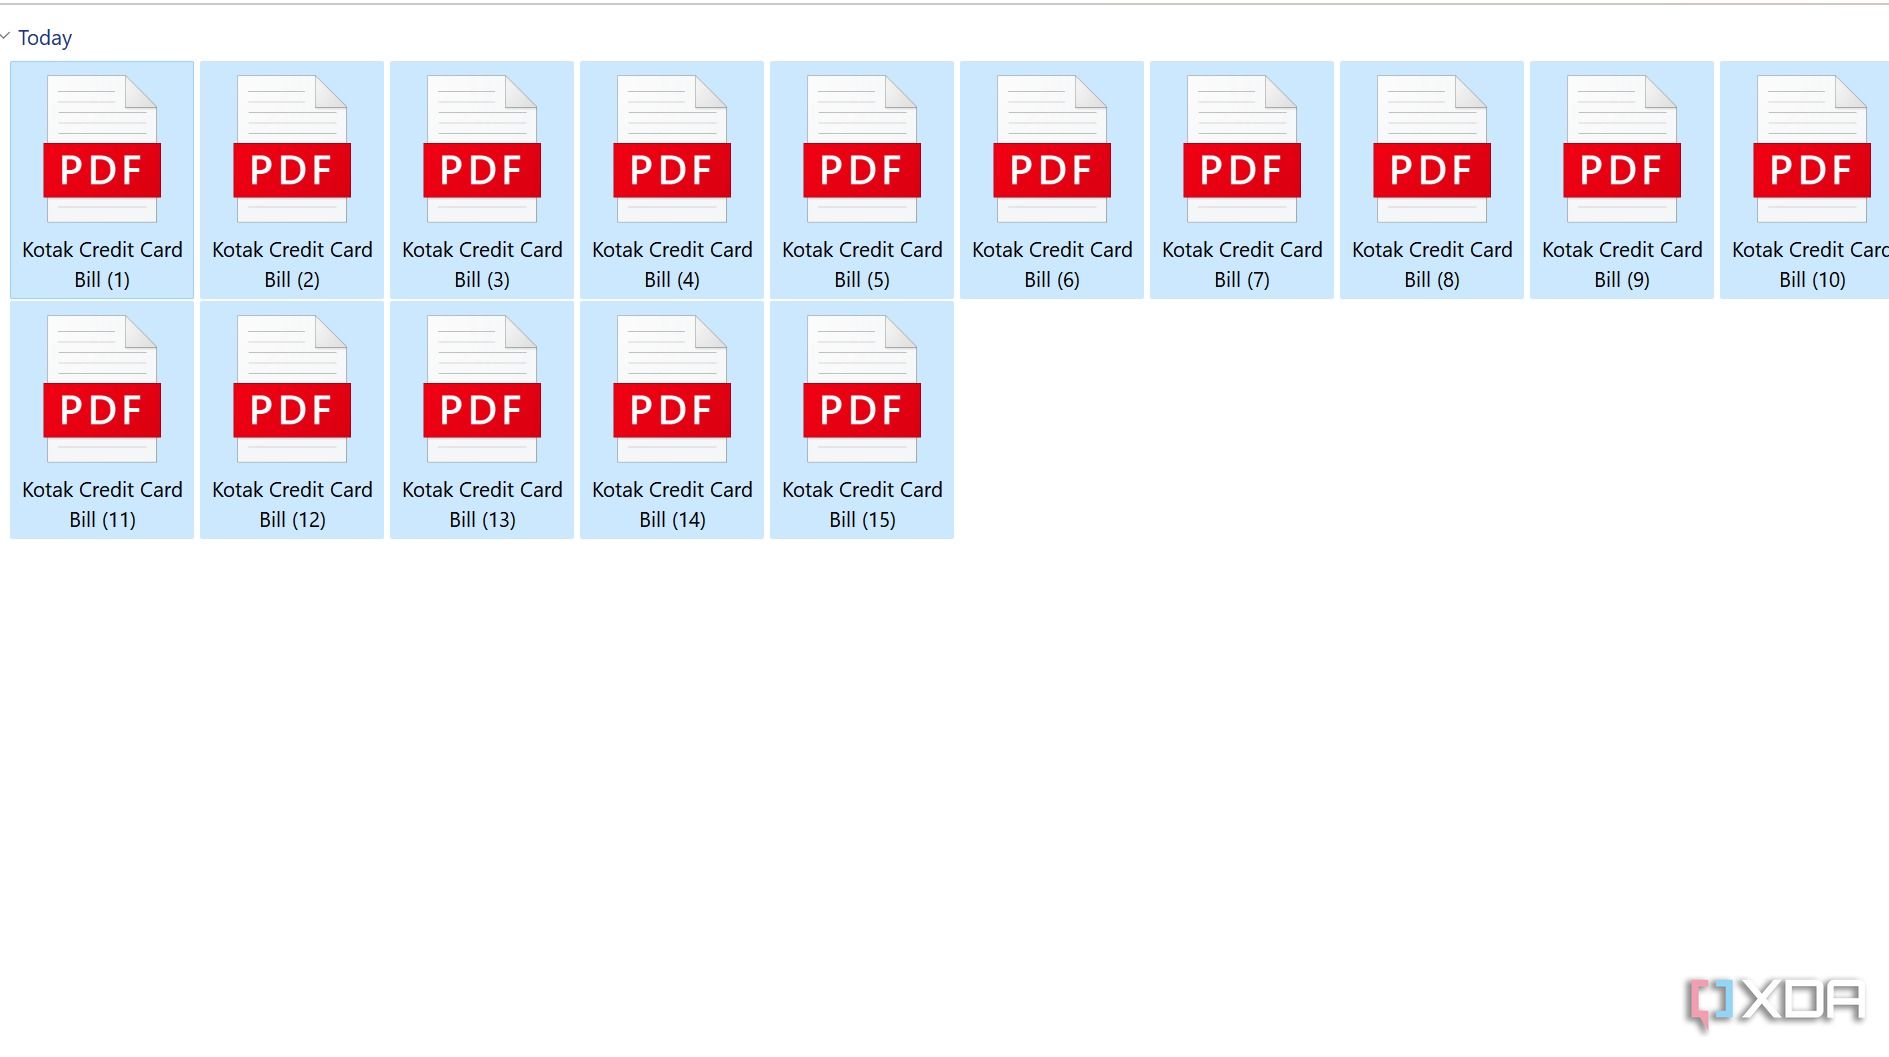 all files renamed